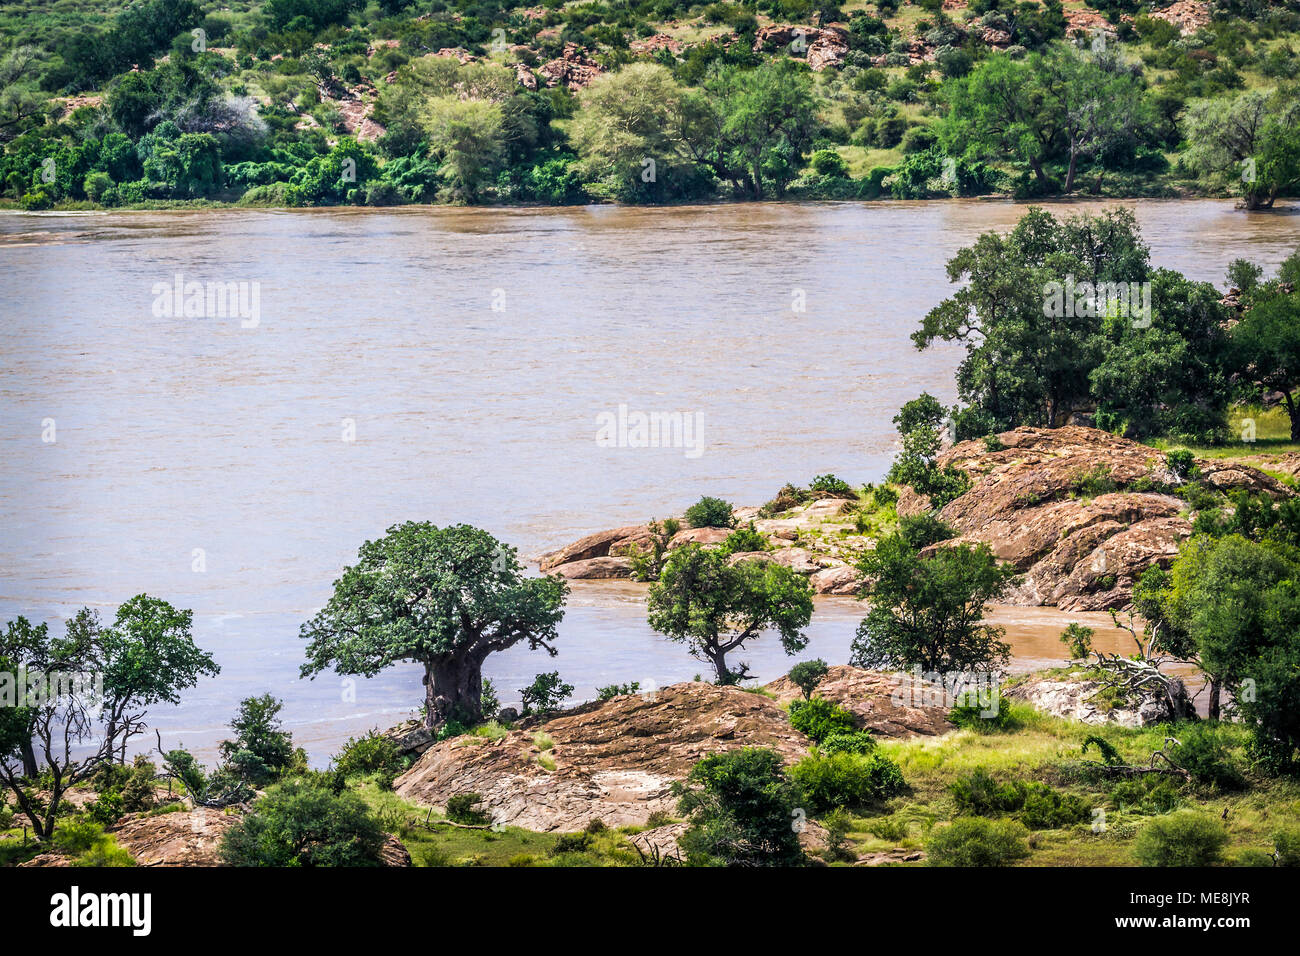 Boundary river between South Africa and in Mapungubwe national park, South Africa Stock Photo - Alamy